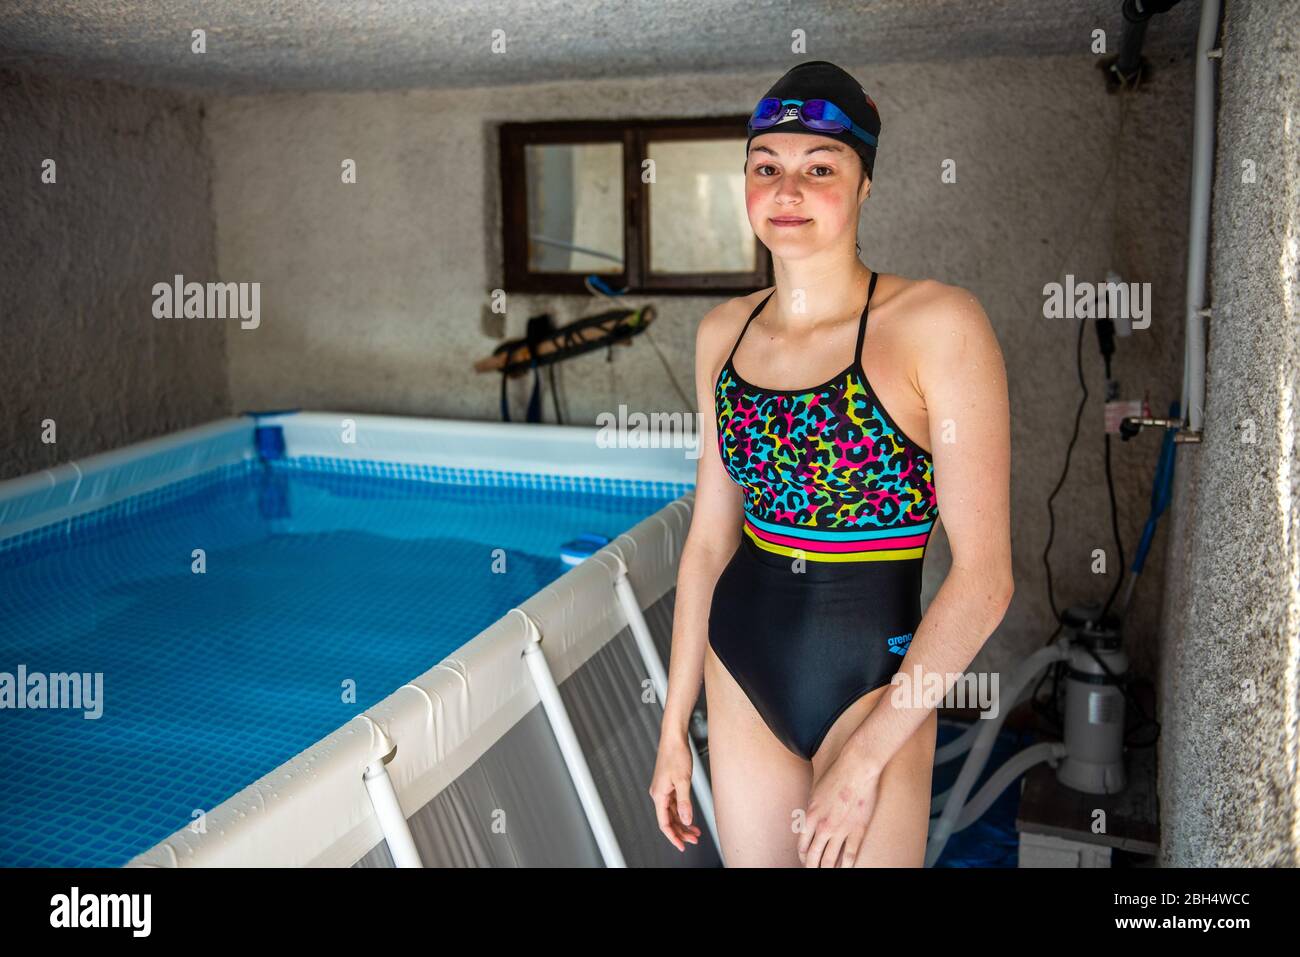 Slovenian swimmer, Katja Fain poses for a photo after training in a swimming pool in her garage.  Due to the Covid-19 pandemic public swimming pools and other sports facilities are closed. Stock Photo